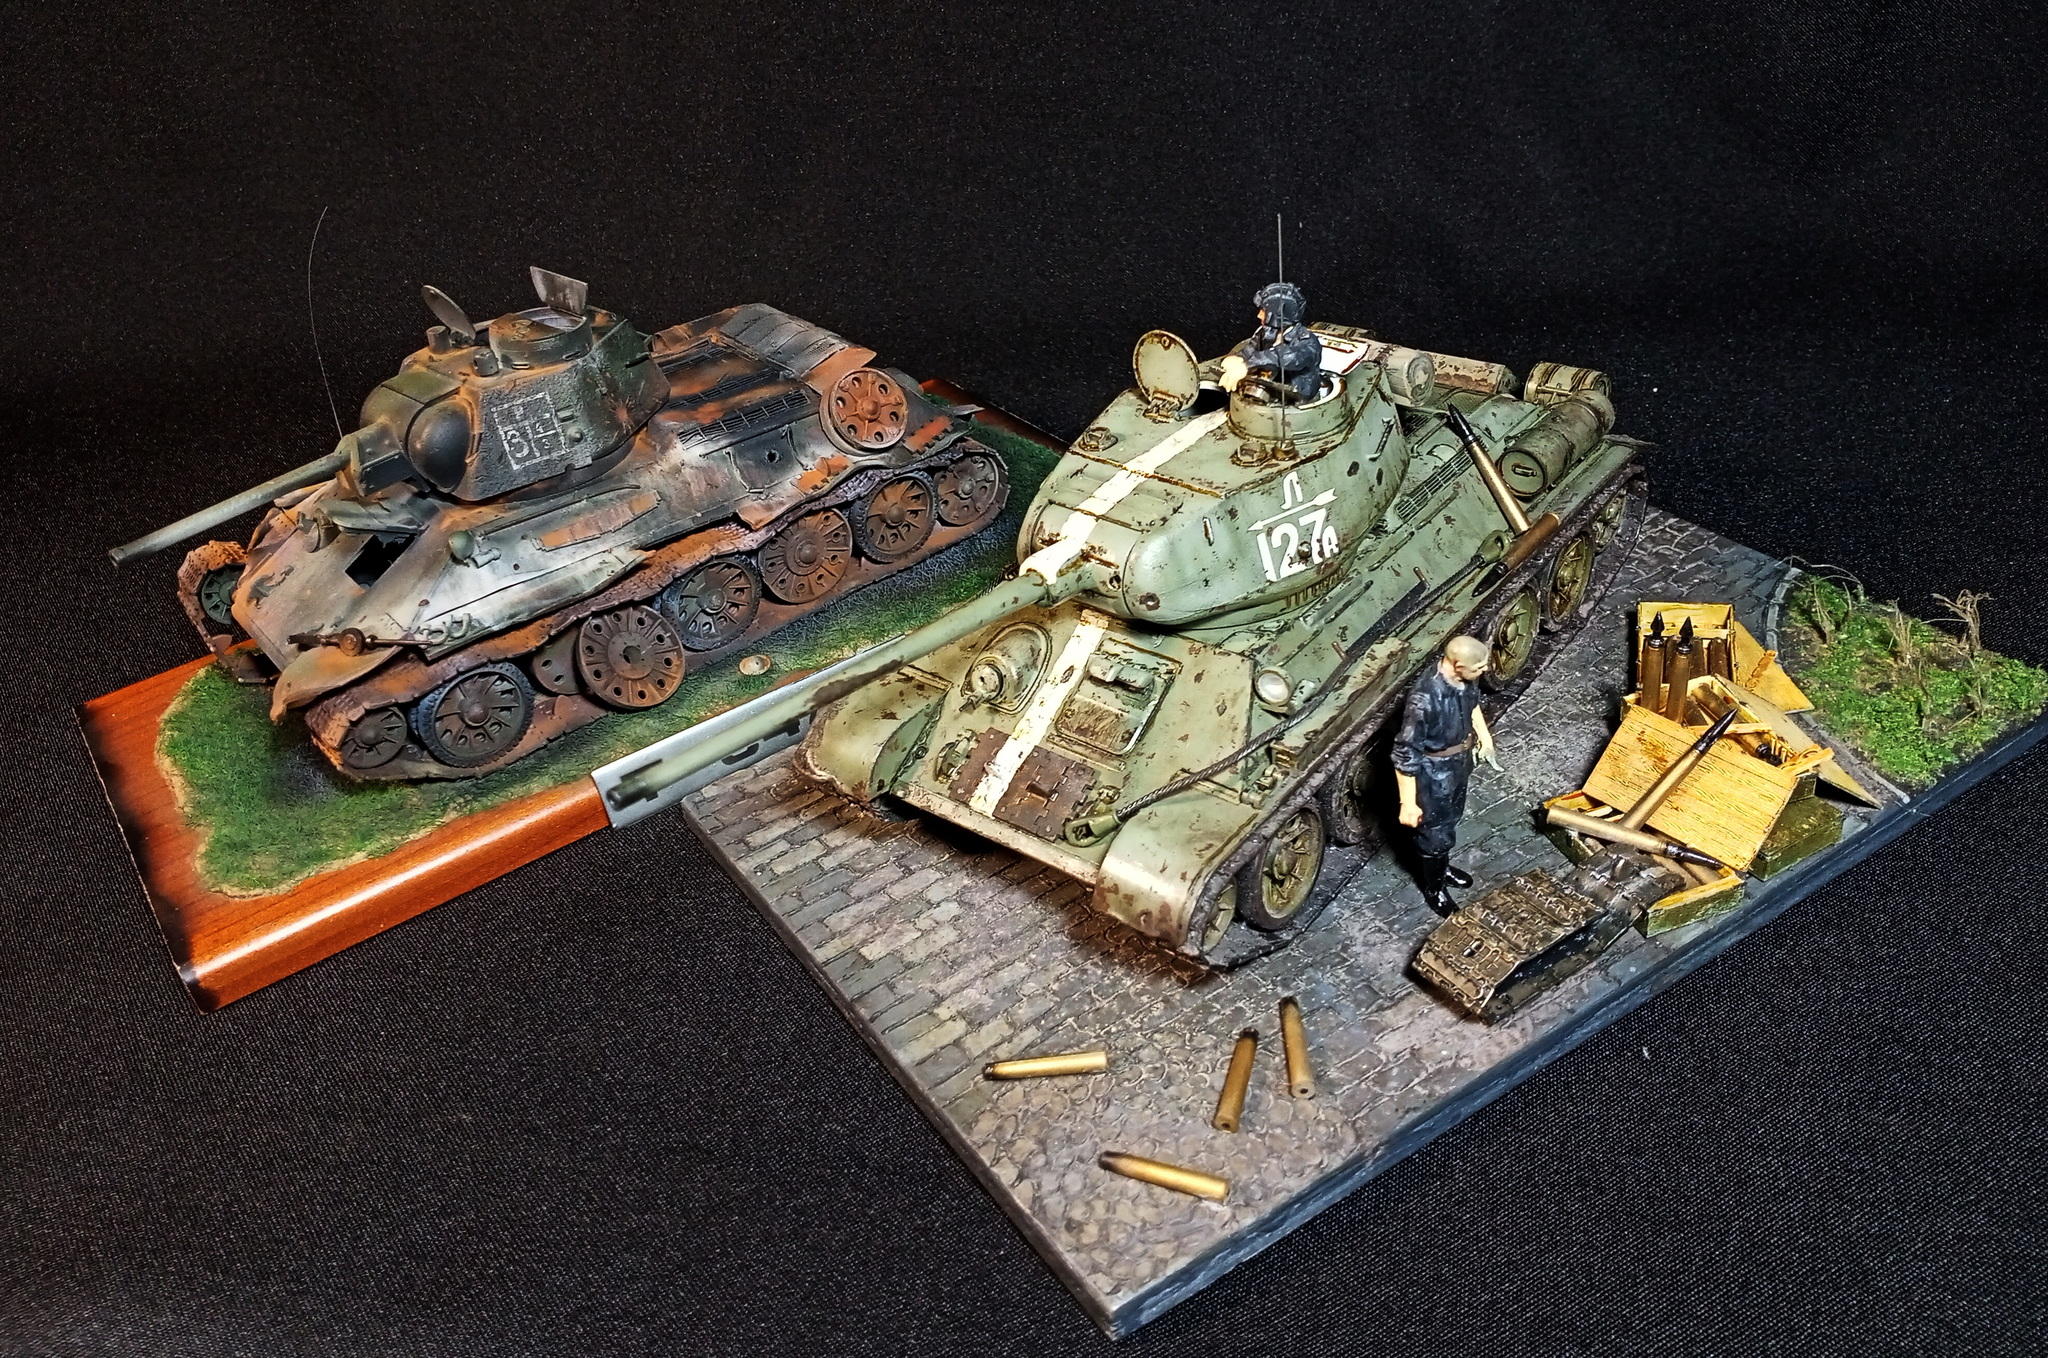 The best thirty-four with a three-inch. T-34/76 mod. 1943 - My, Modeling, Stand modeling, Prefabricated model, Miniature, With your own hands, Needlework without process, Story, Scale model, Collection, Collecting, Tanks, Armored vehicles, Technics, Military equipment, Interesting, The Second World War, The Great Patriotic War, T-34, Diorama, Video, Longpost